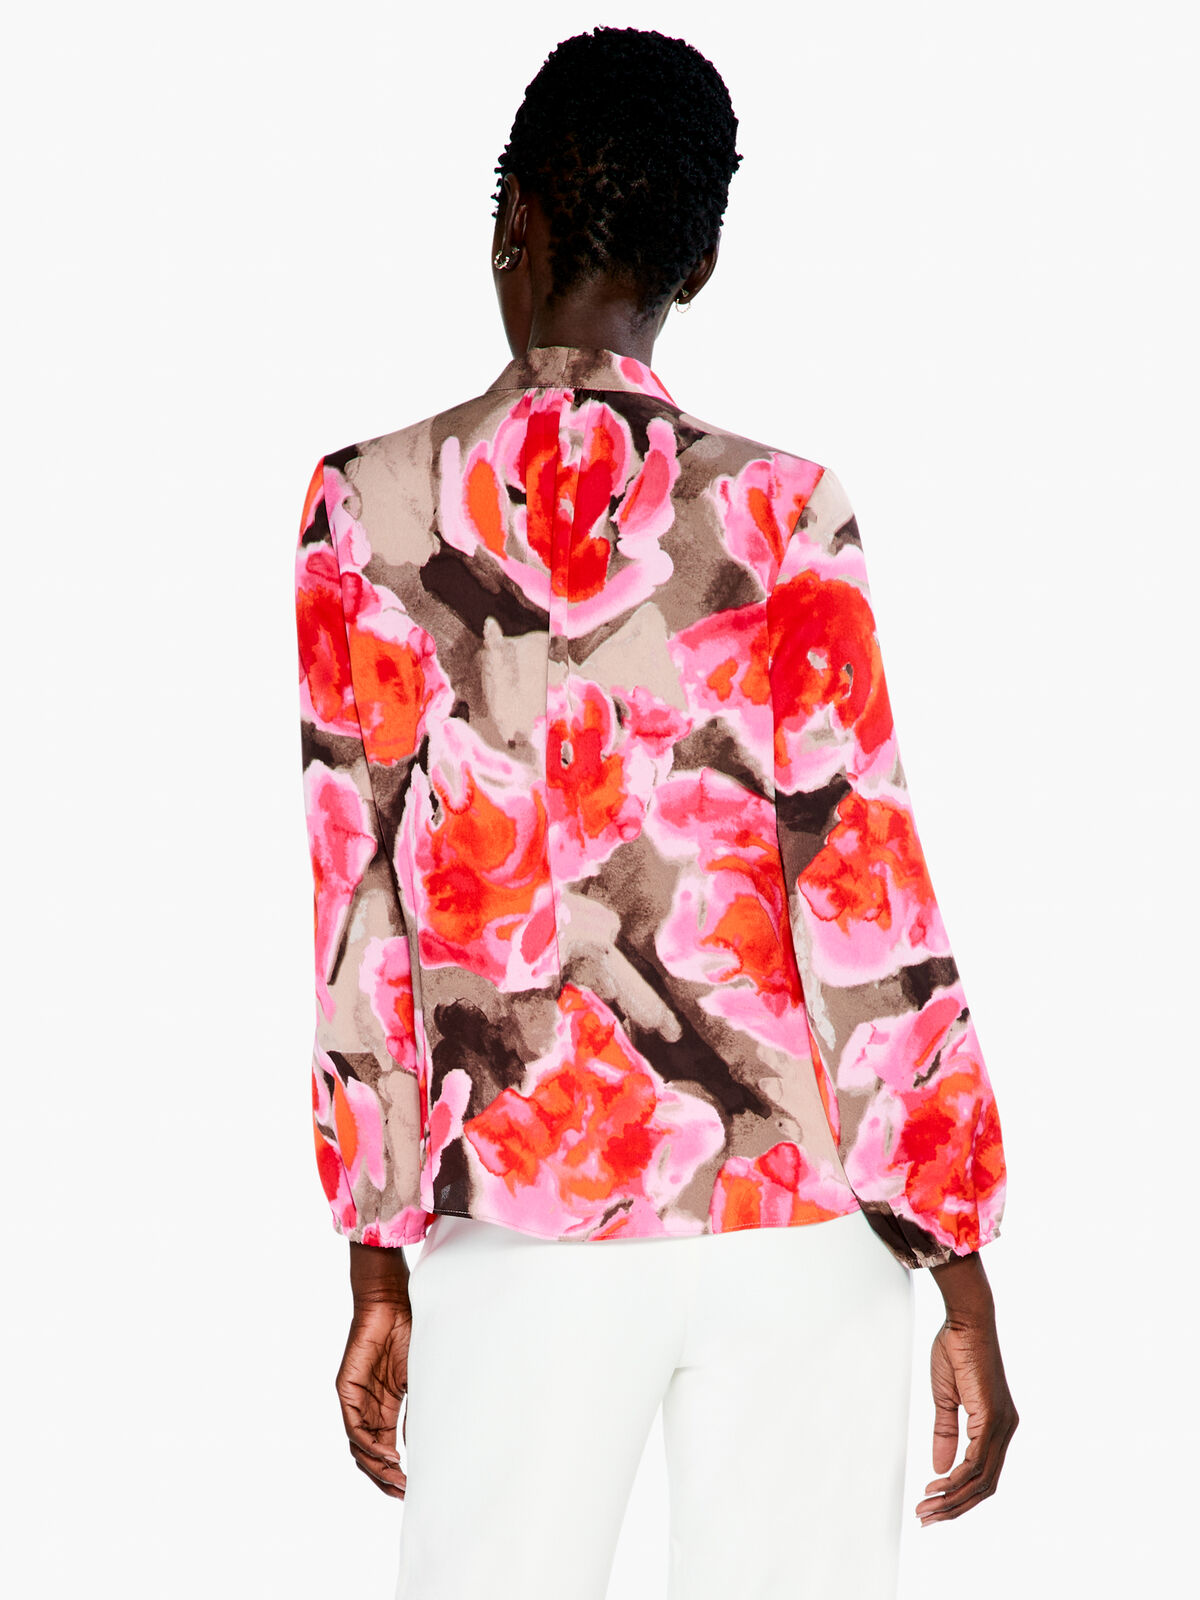 Rosy Outlook Top